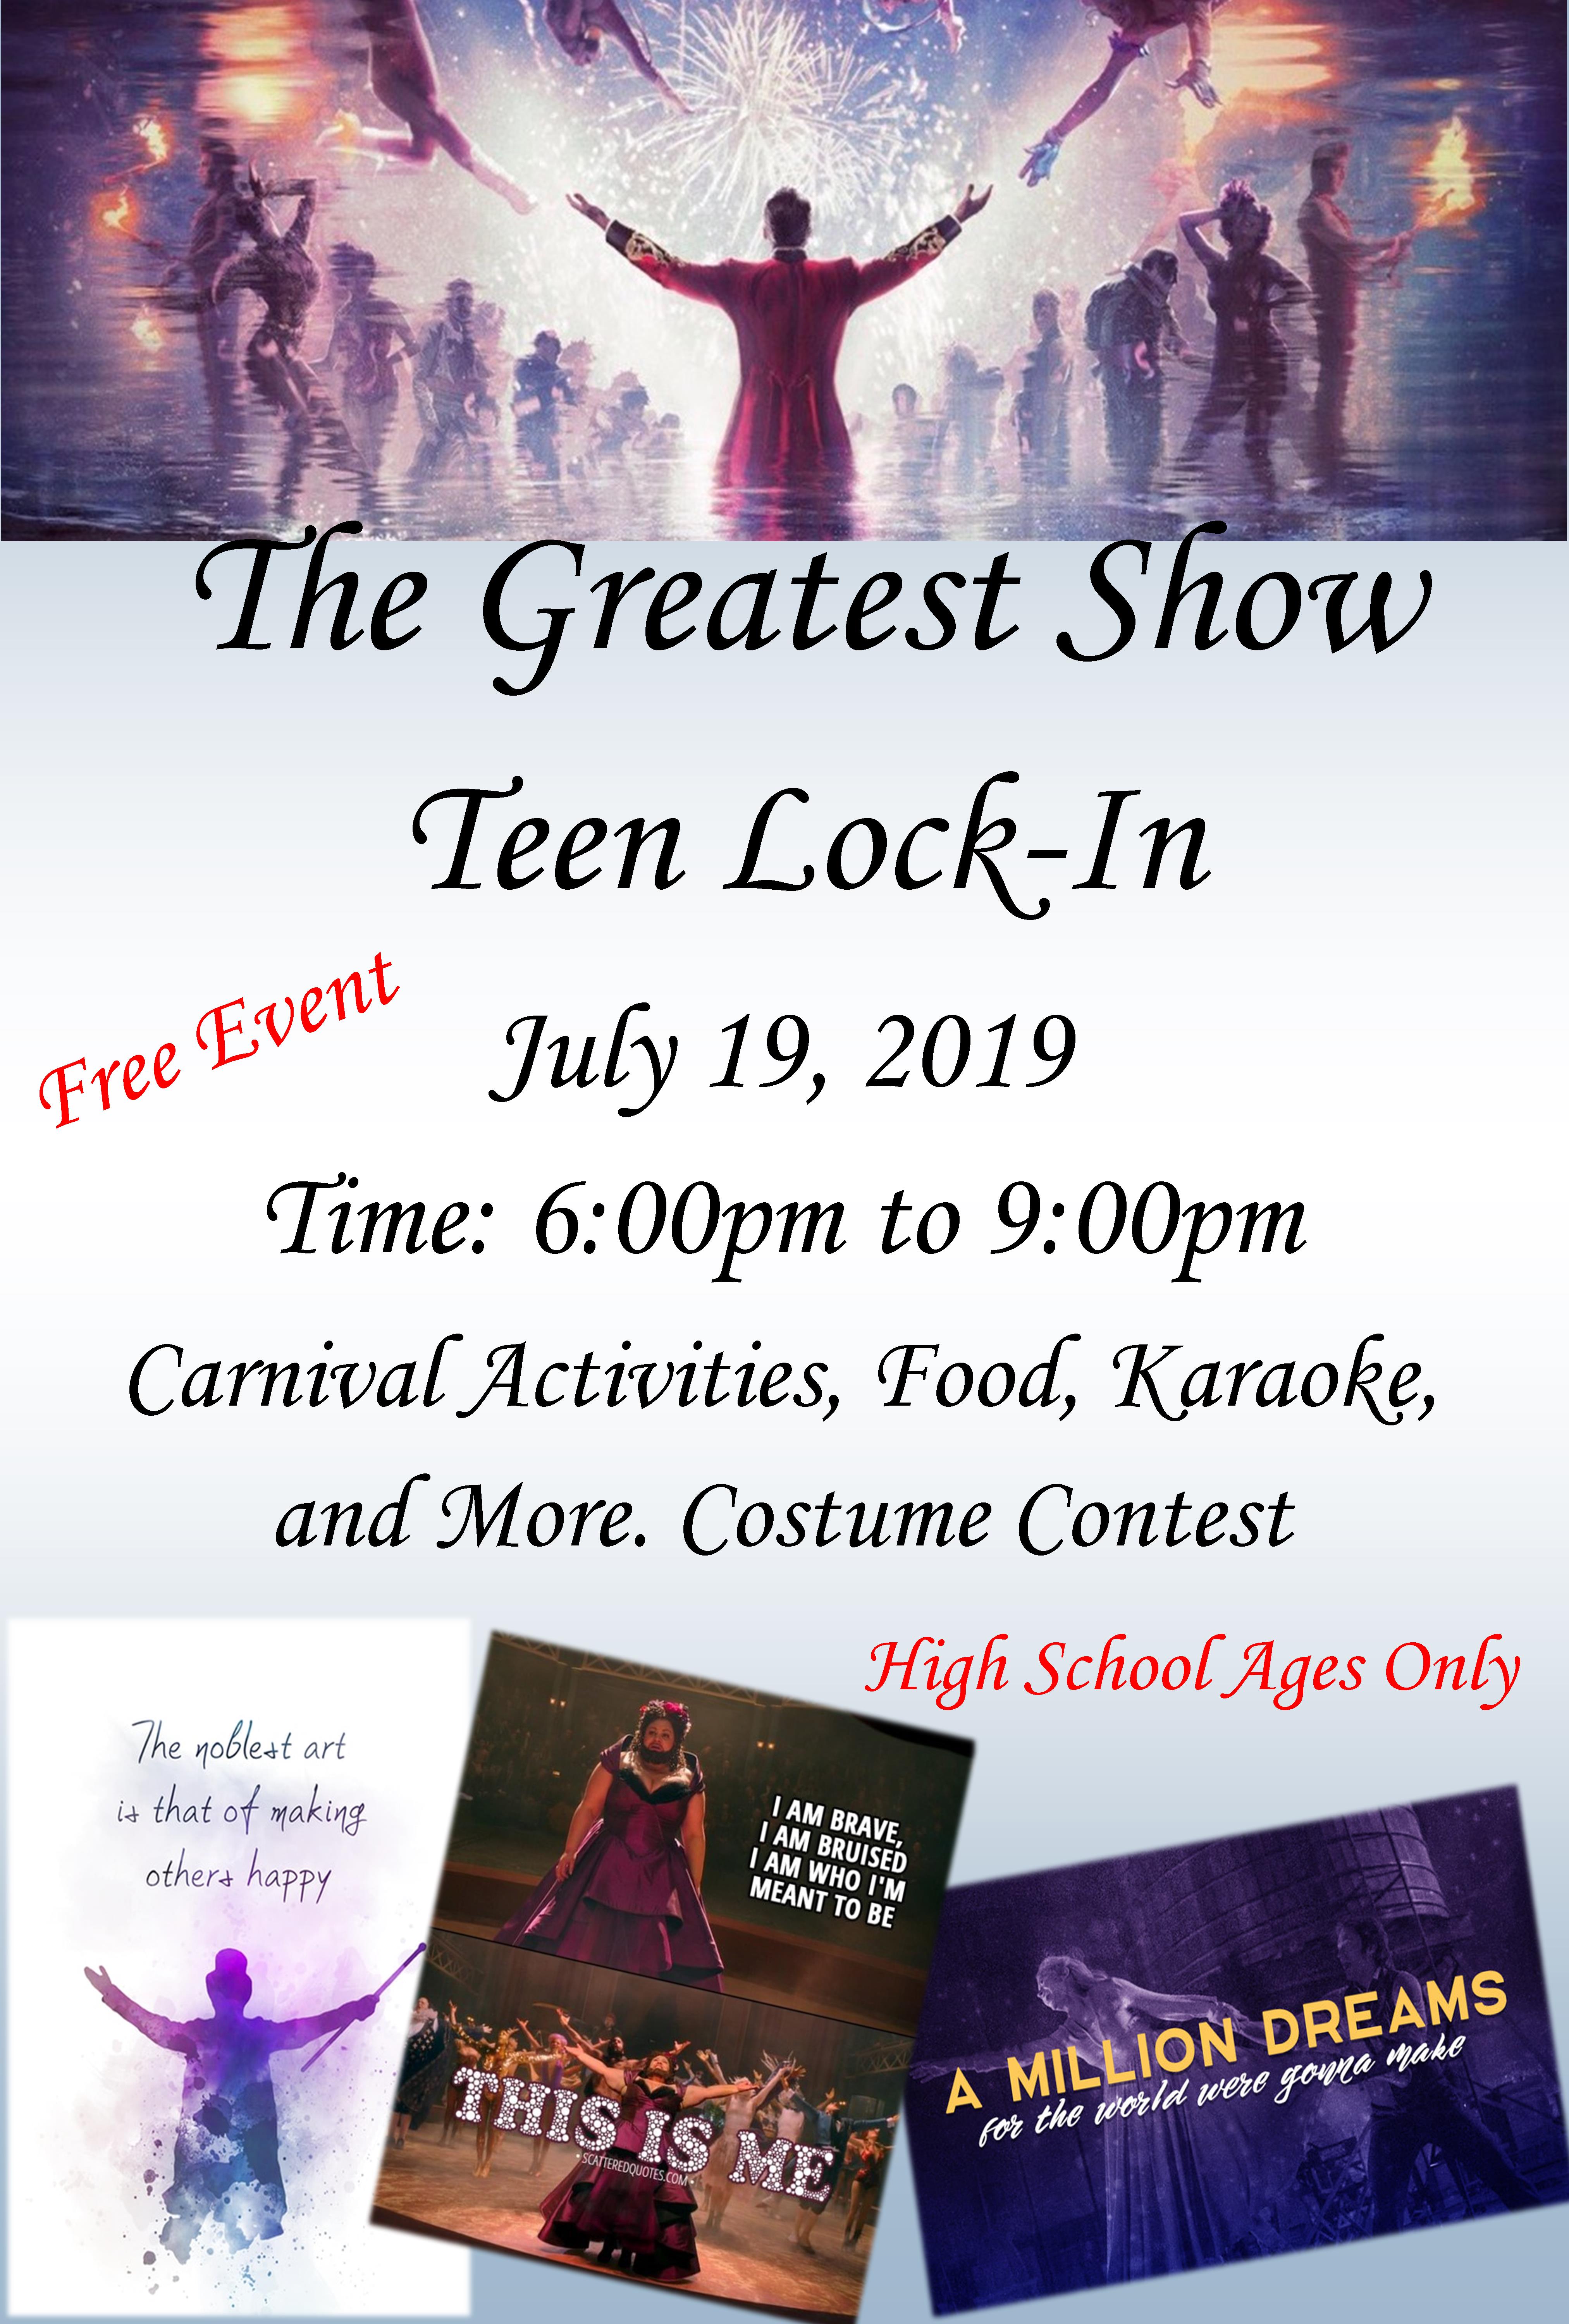 The Greatest Show Teen Lock-In